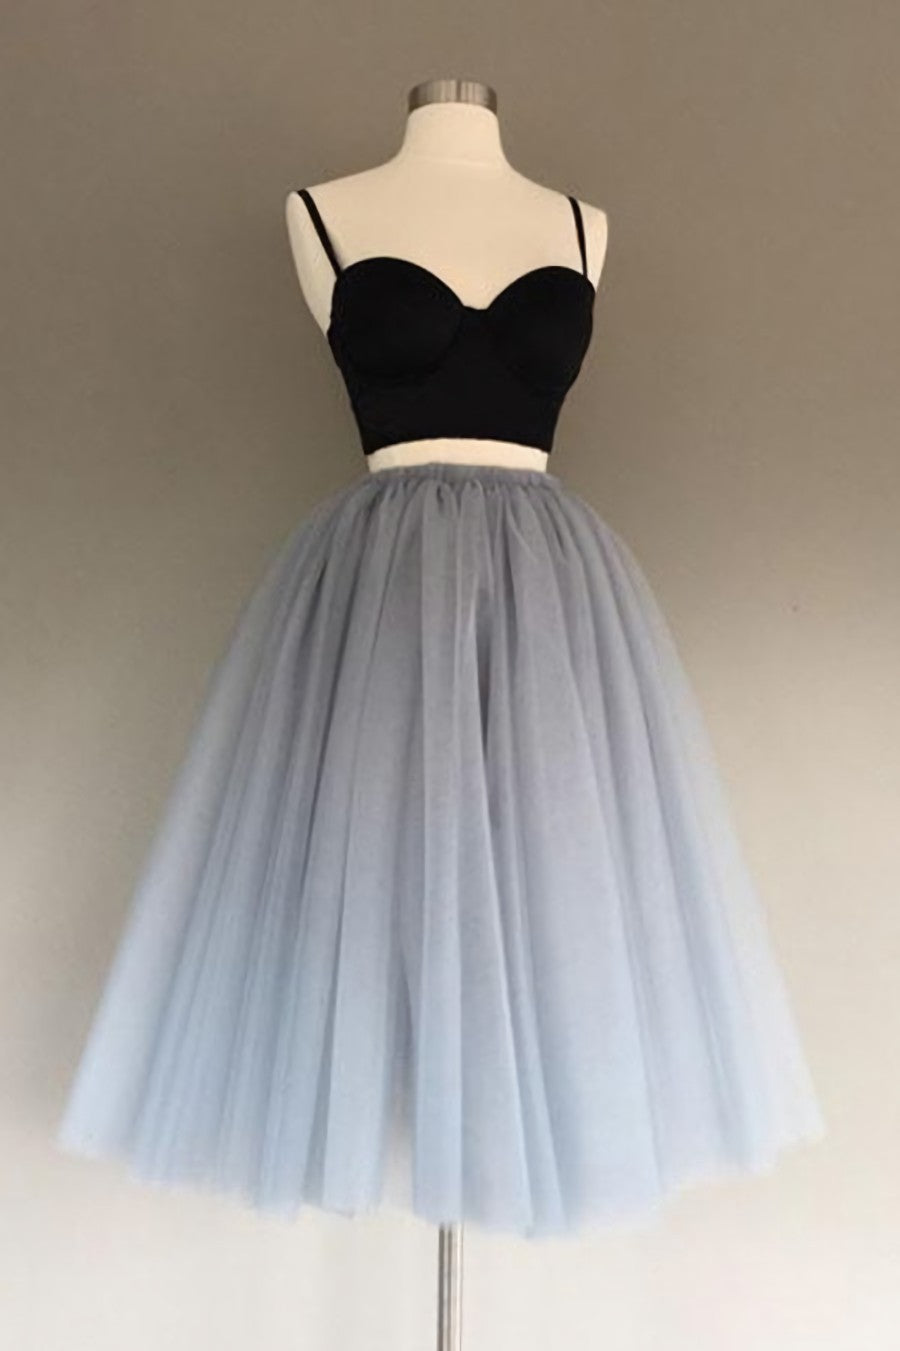 Gray Tulle Charming A-Line Two-Piece Short Homecoming Dress,Cocktail Dress